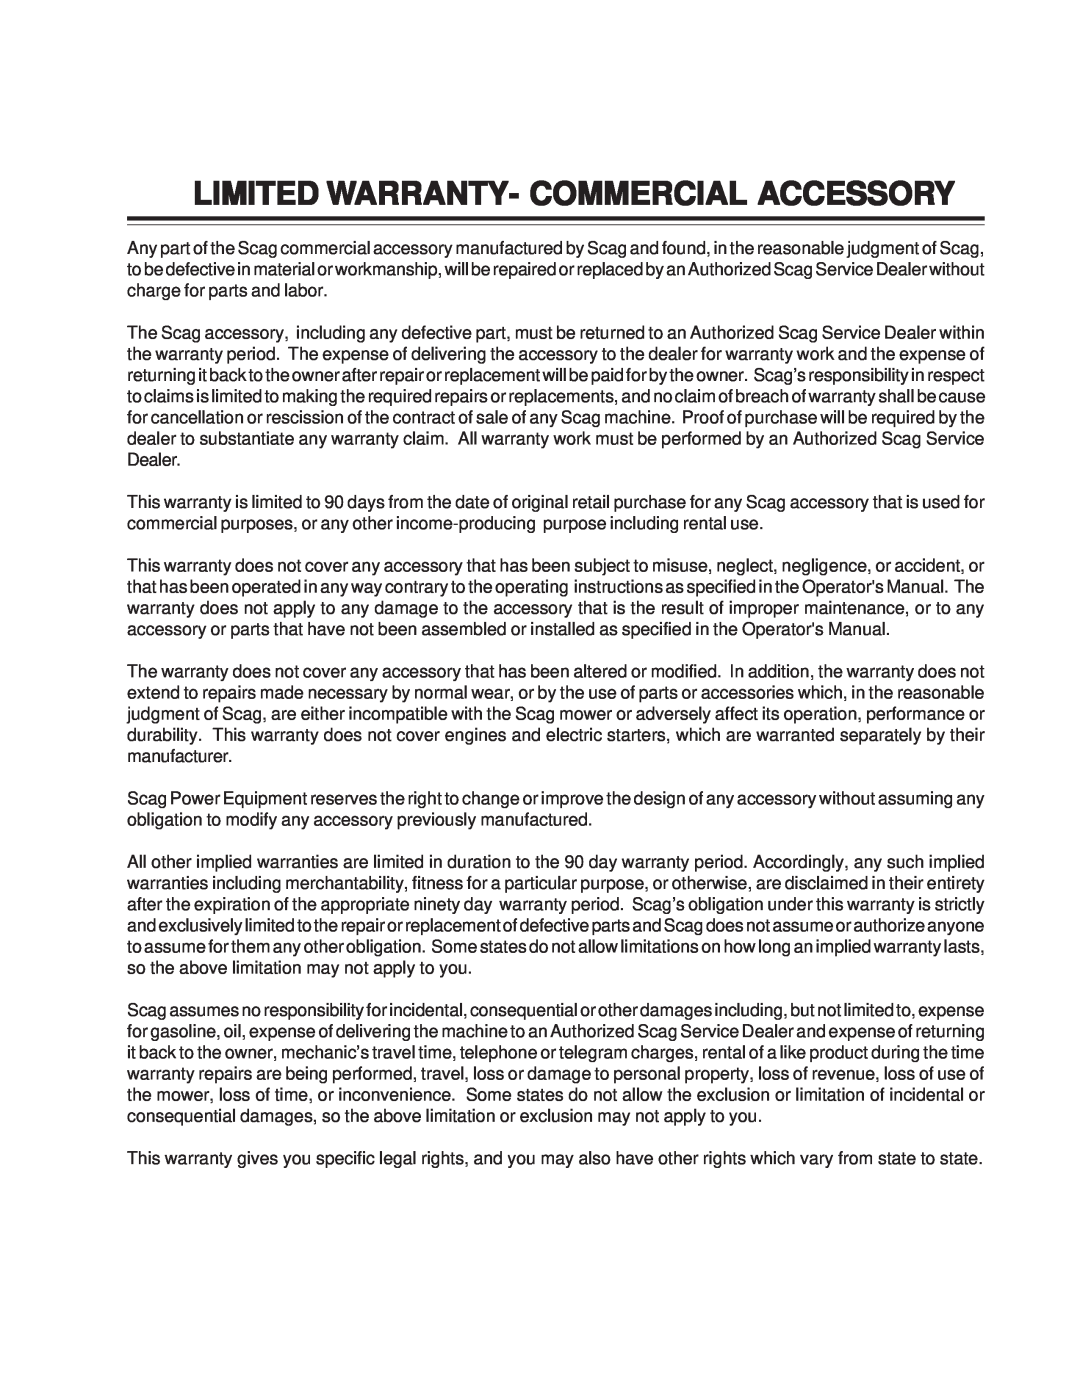 Scag Power Equipment SE-3.5BS manual Limited Warranty- Commercial Accessory 